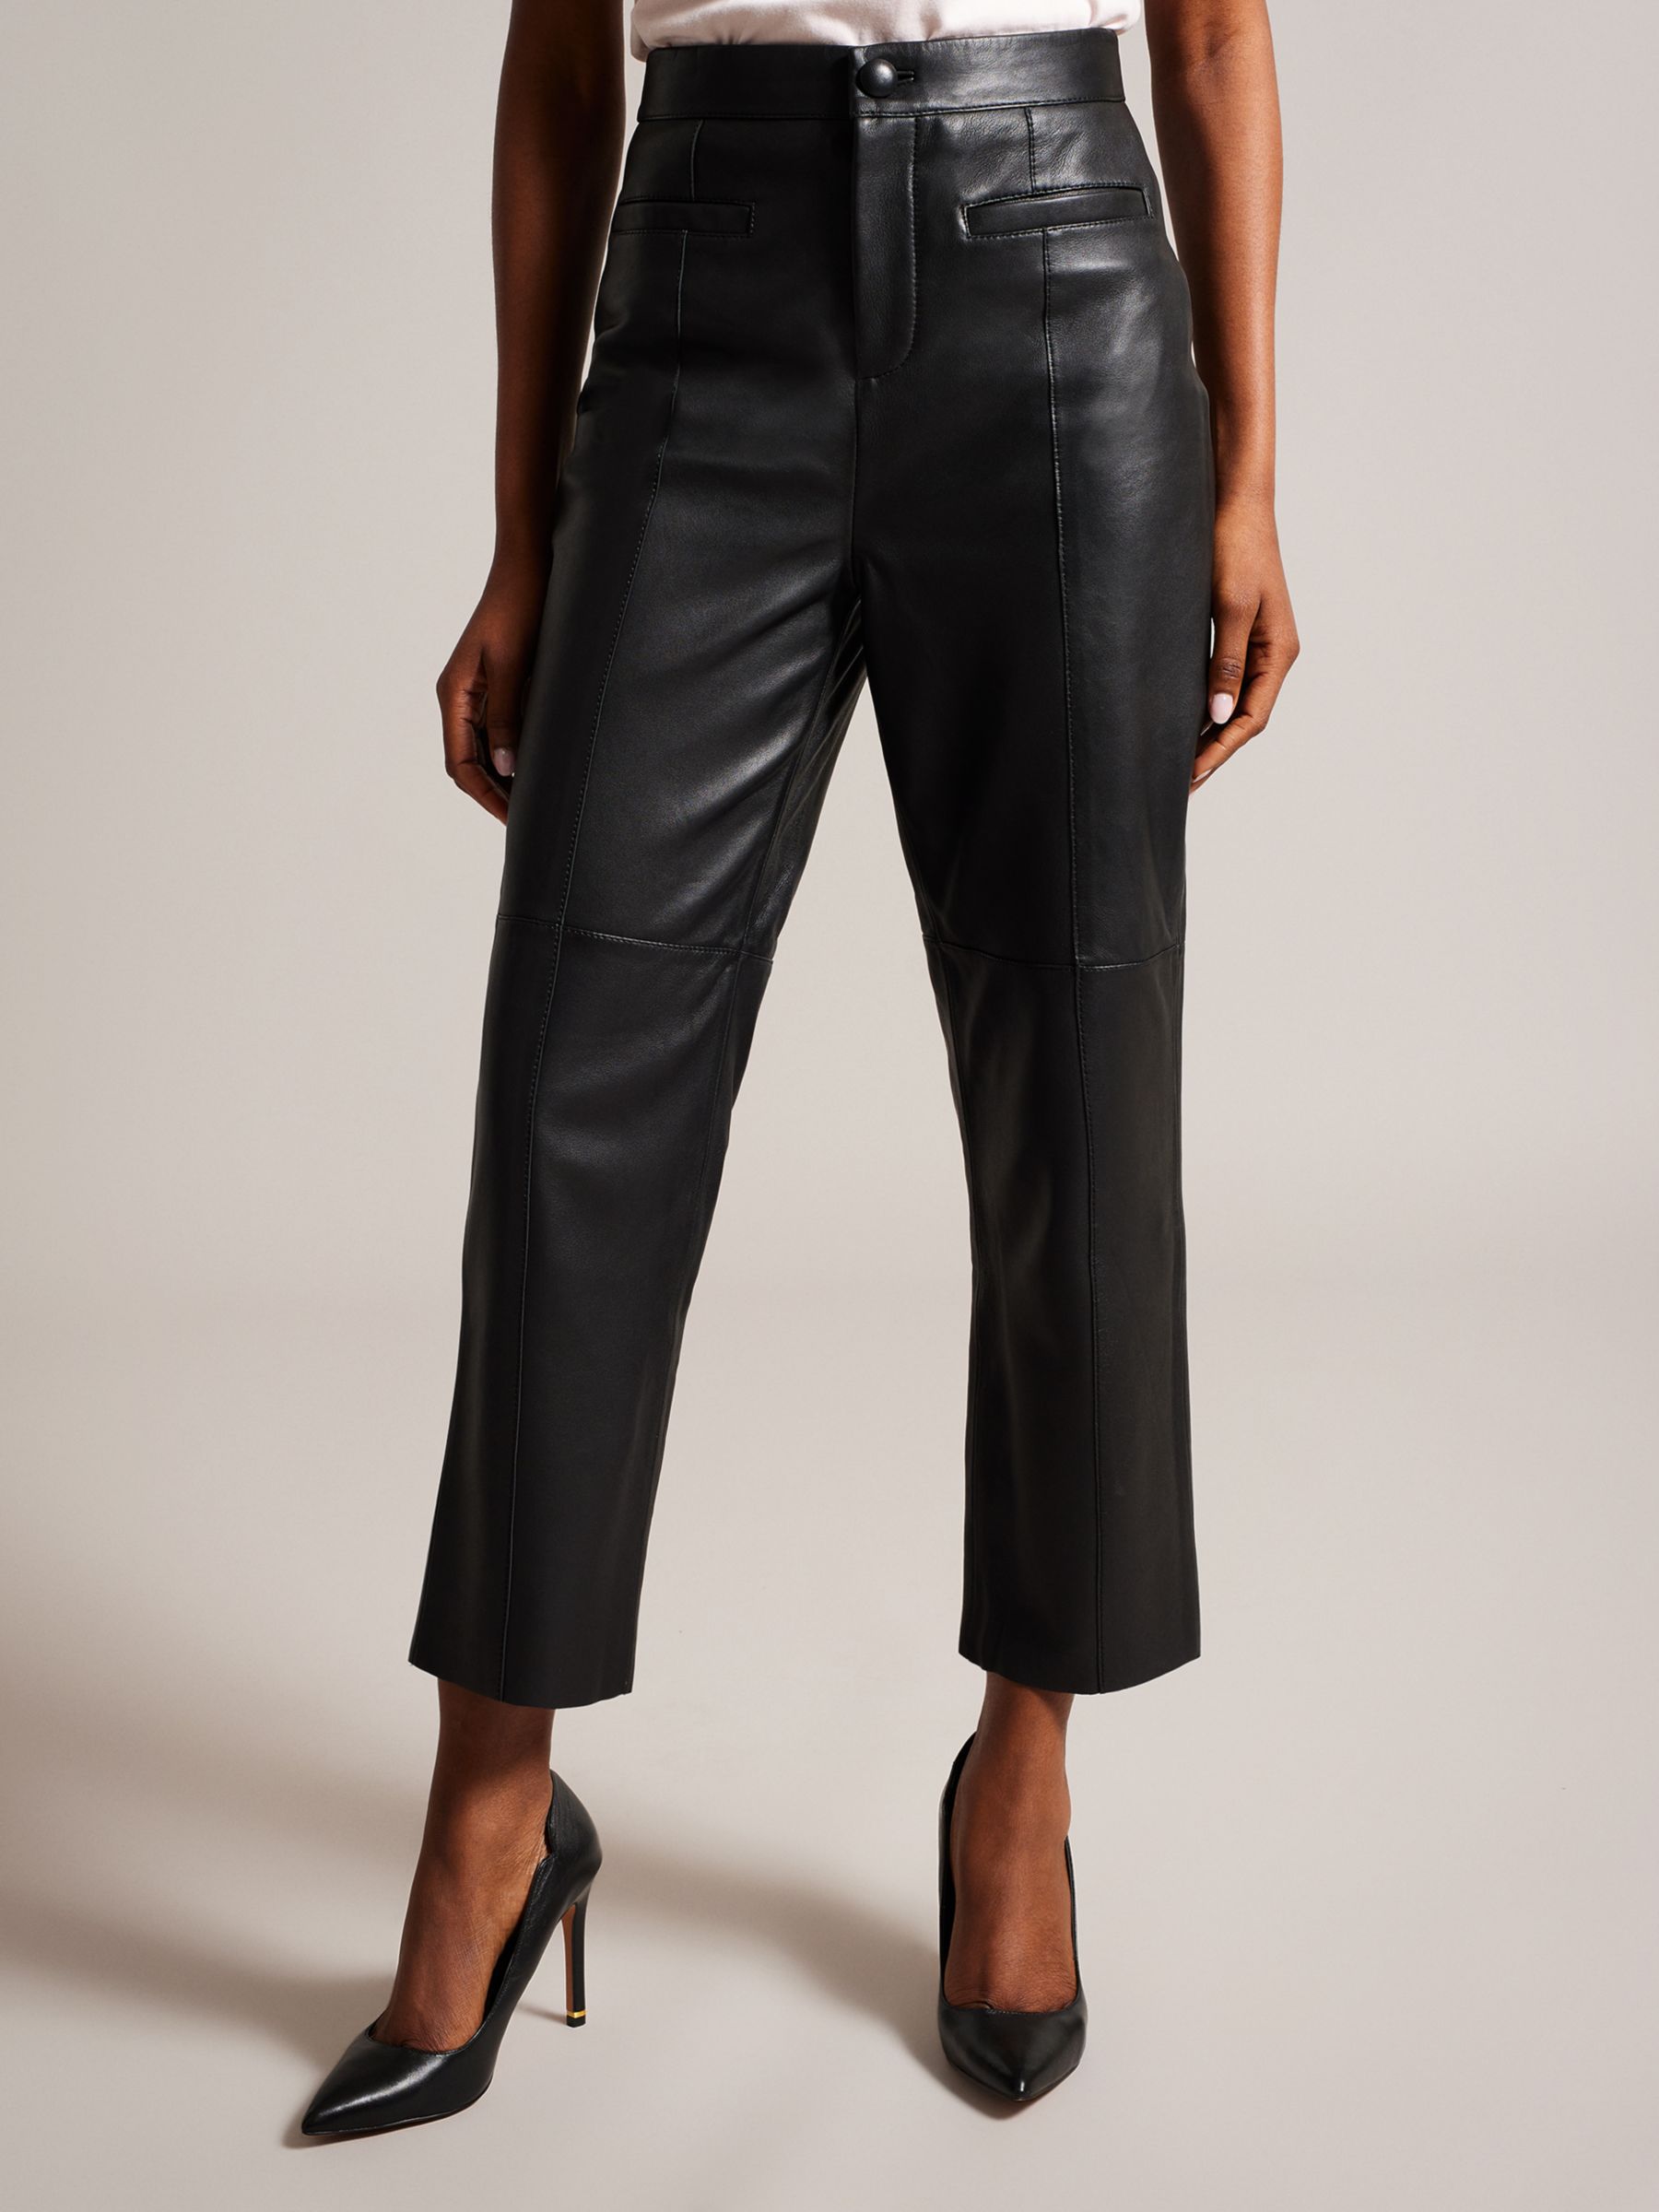 Ted Baker Enyyaa Cropped Leather Trouser, Black at John Lewis